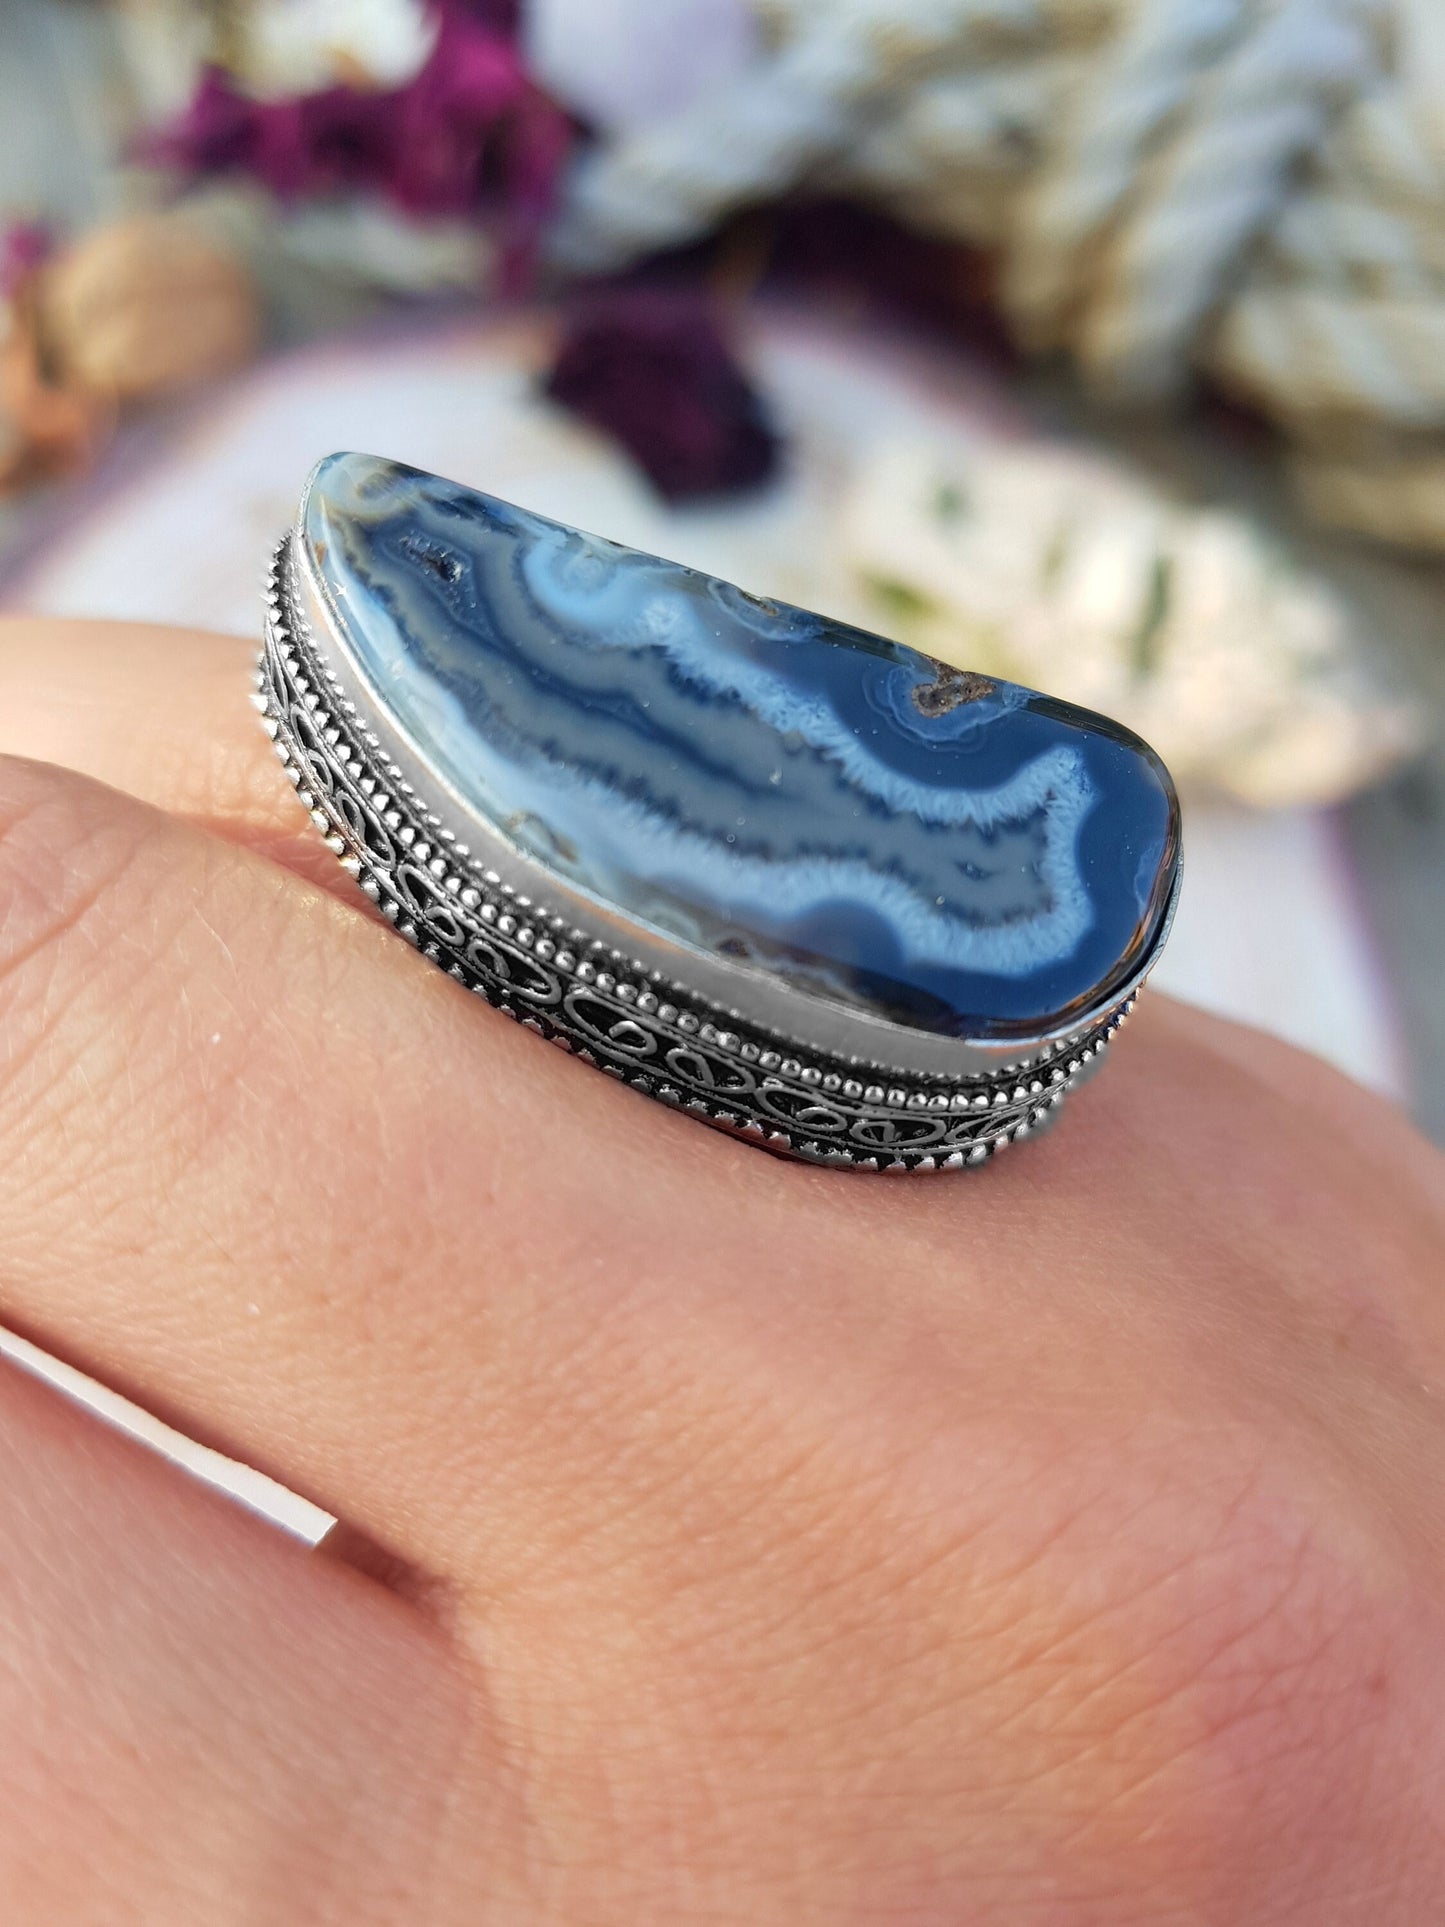 Solar Agate Ring In Sterling Silver Size US 7 Big Statement Ring Boho Rings Raw Gemstone Ring Unique Gift For Her